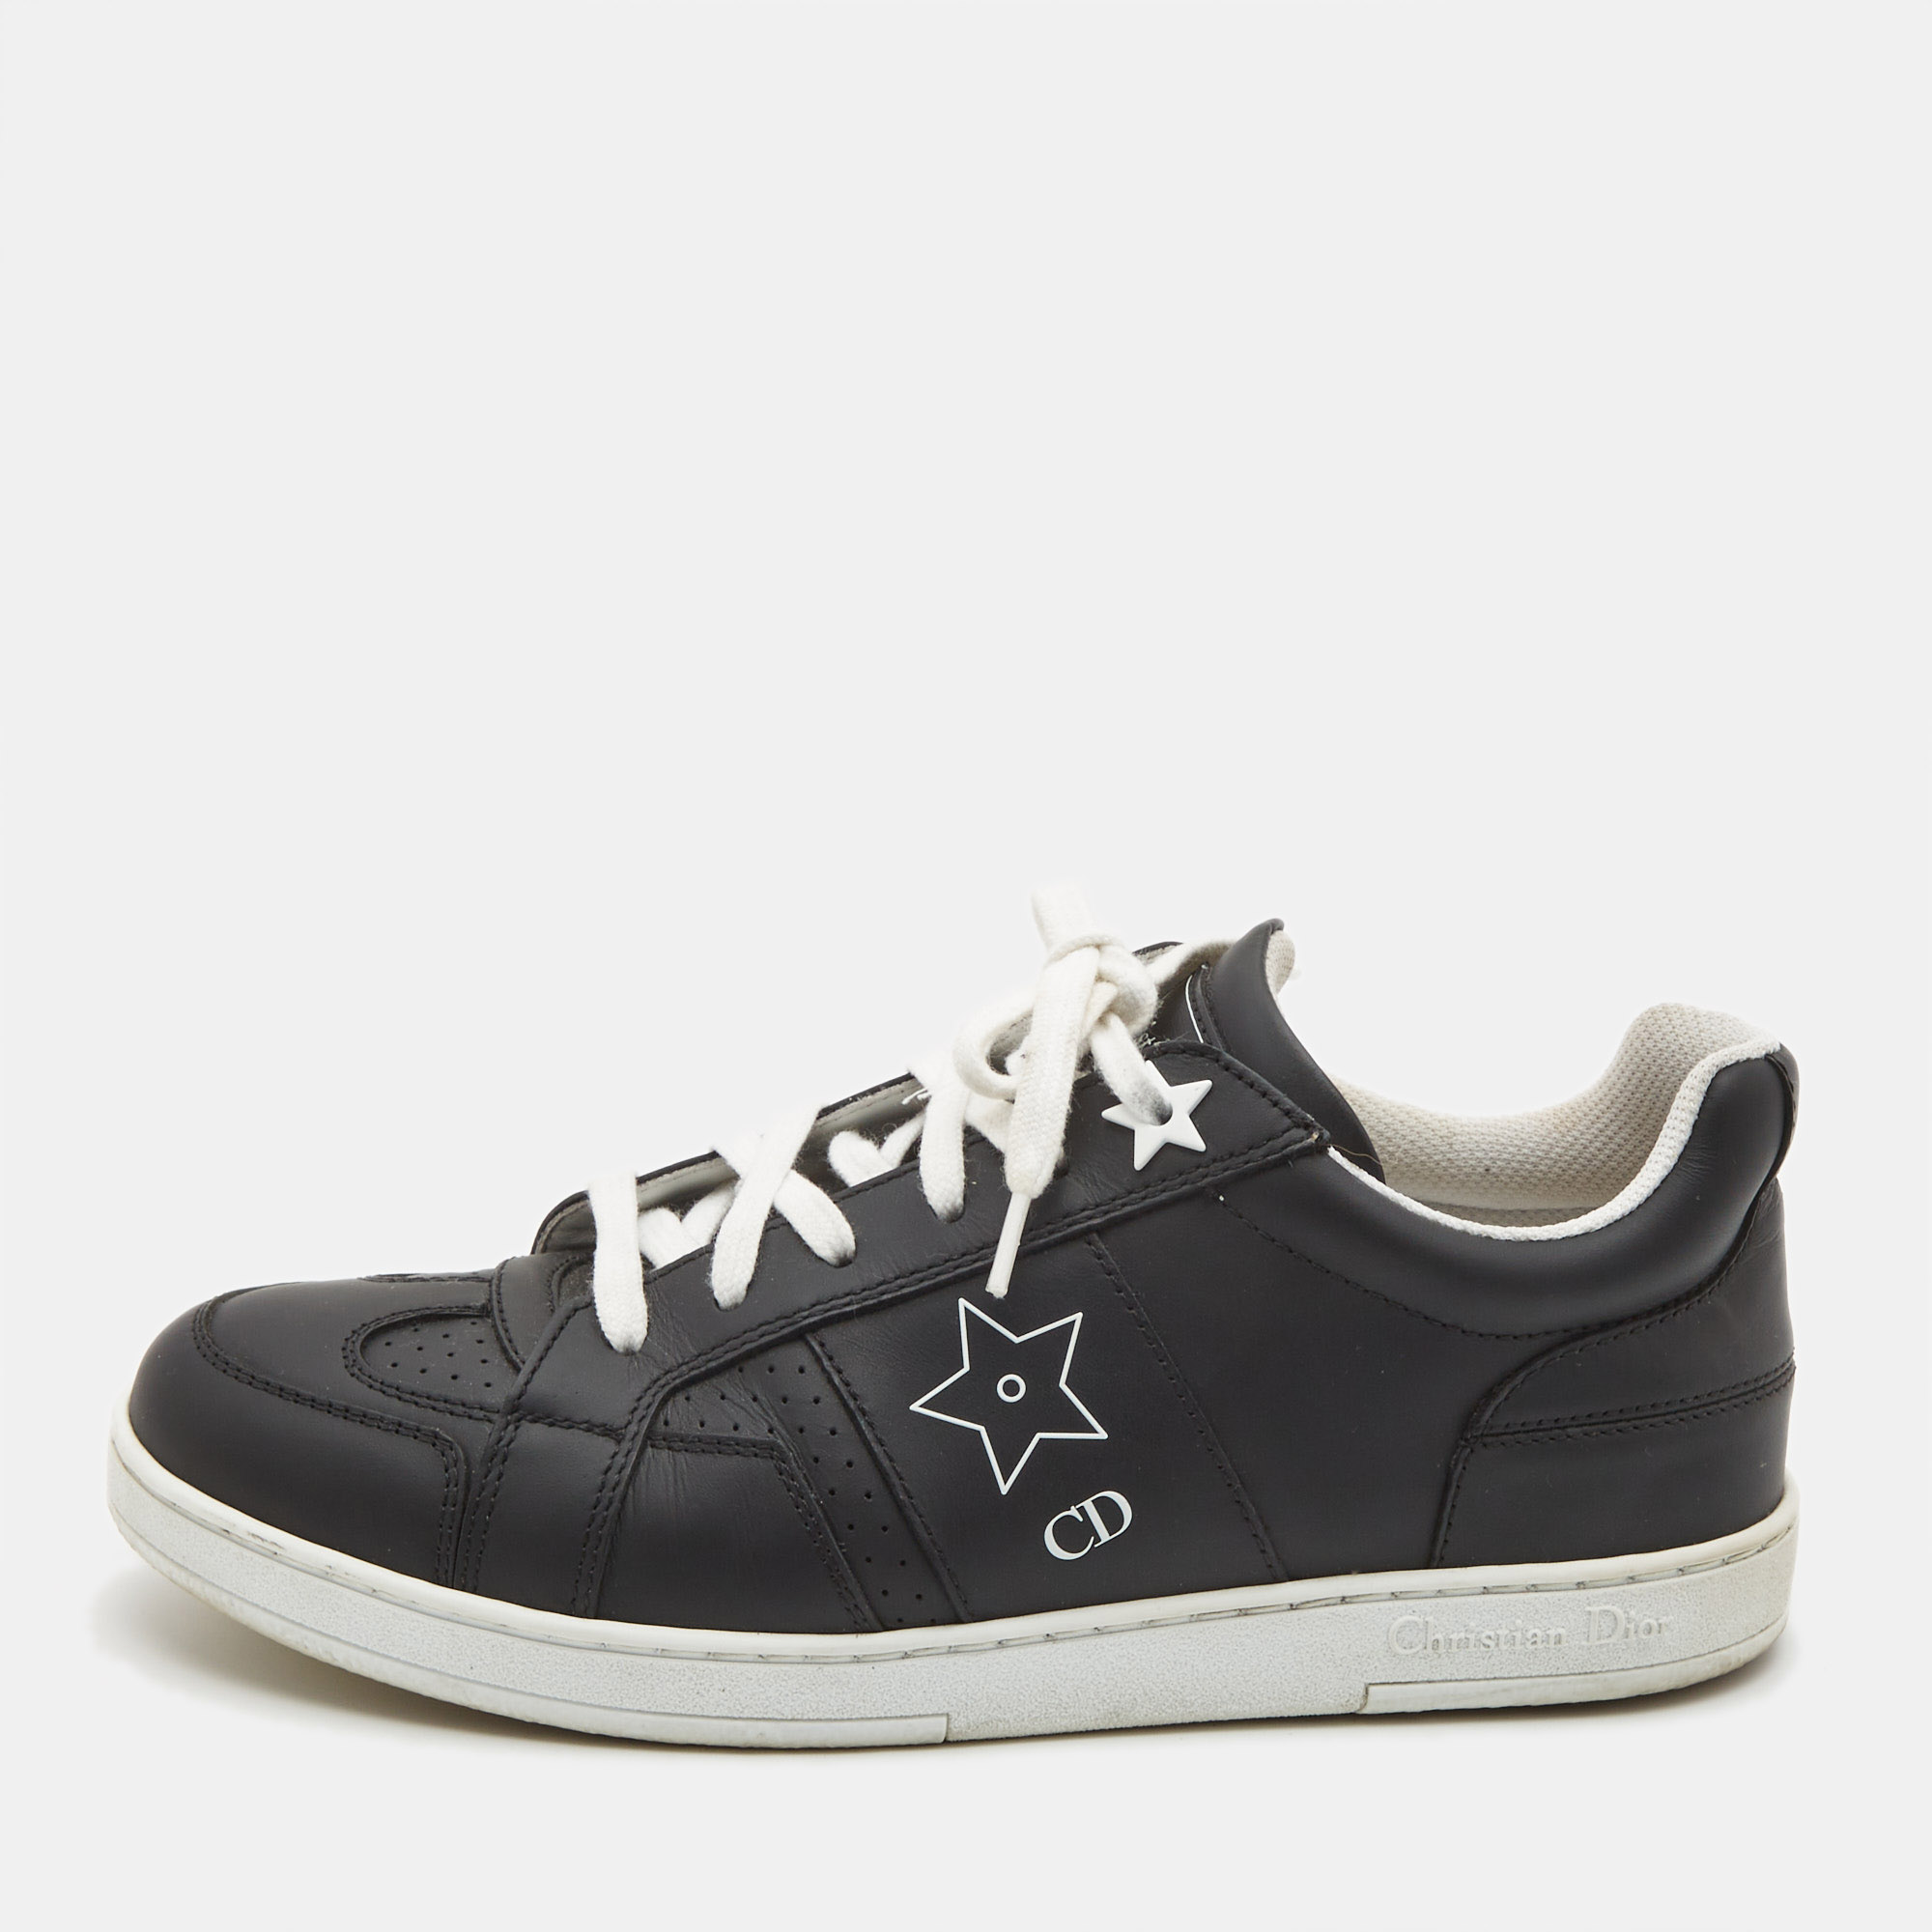 Dior black leather star sneakers size 36